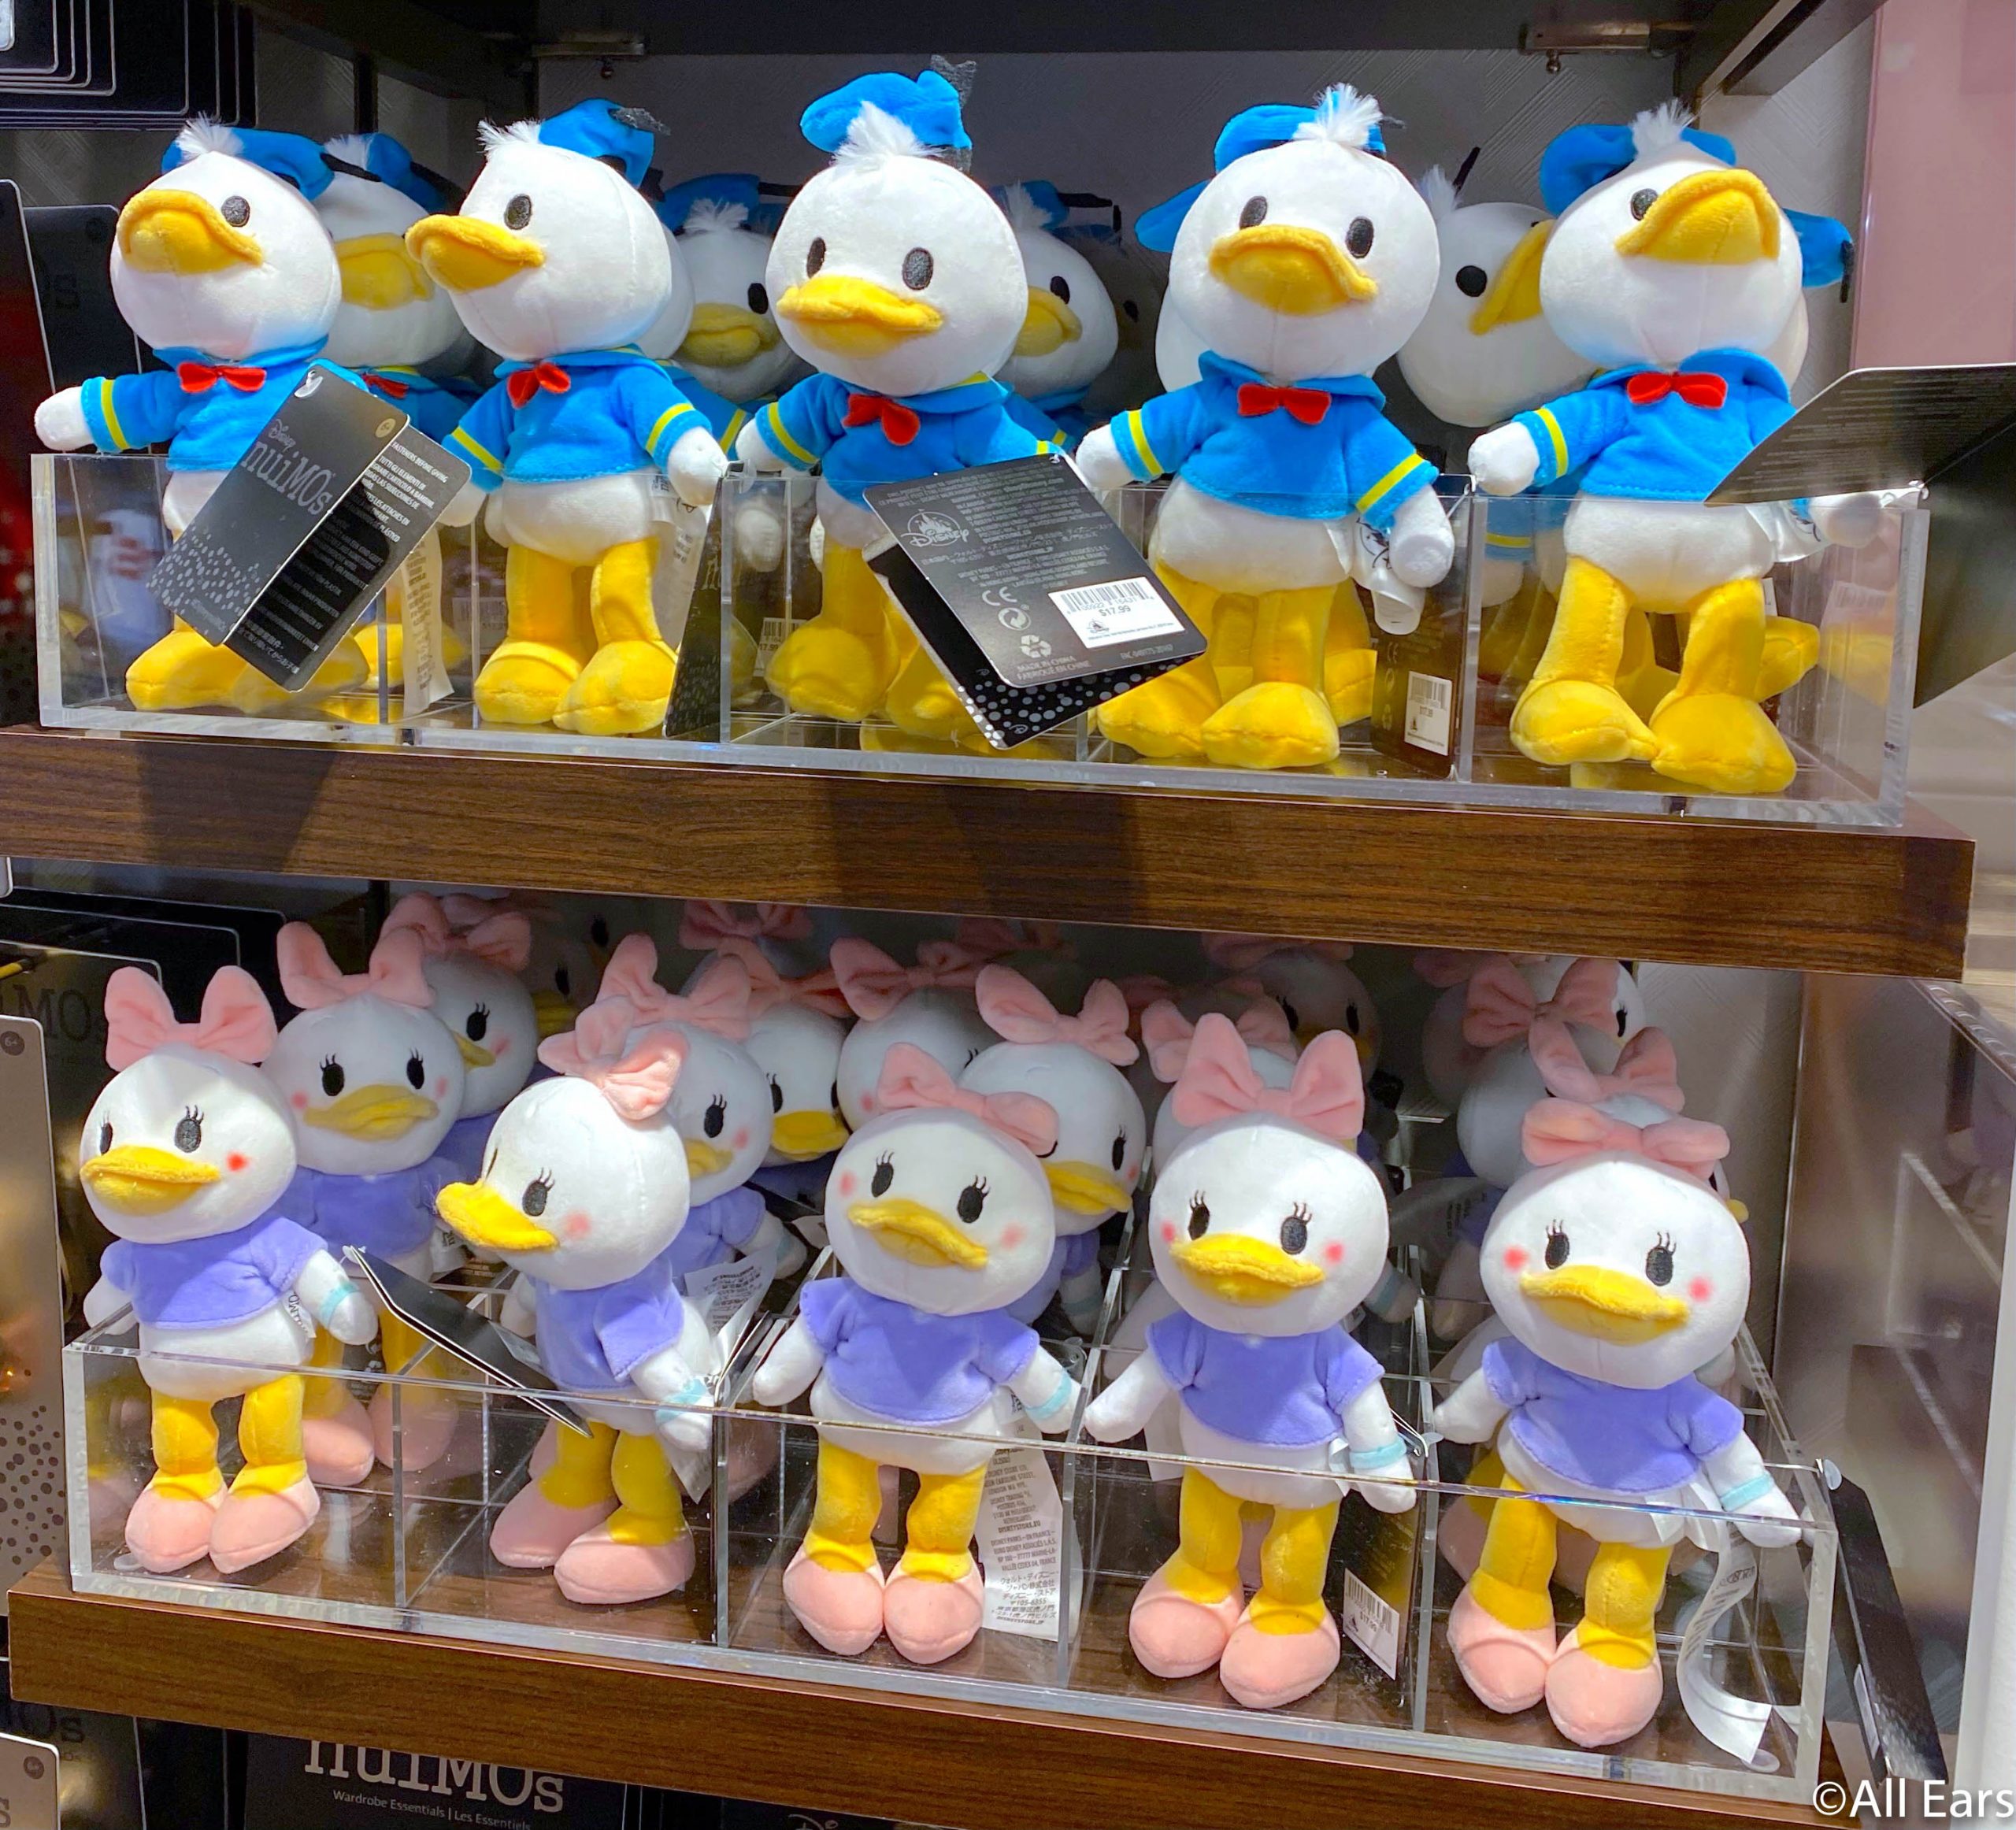 https://allears.net/wp-content/uploads/2021/01/2021-reopening-wdw-disneys-hollywood-studios-daisy-donald-nuimo-plushes-scaled.jpg